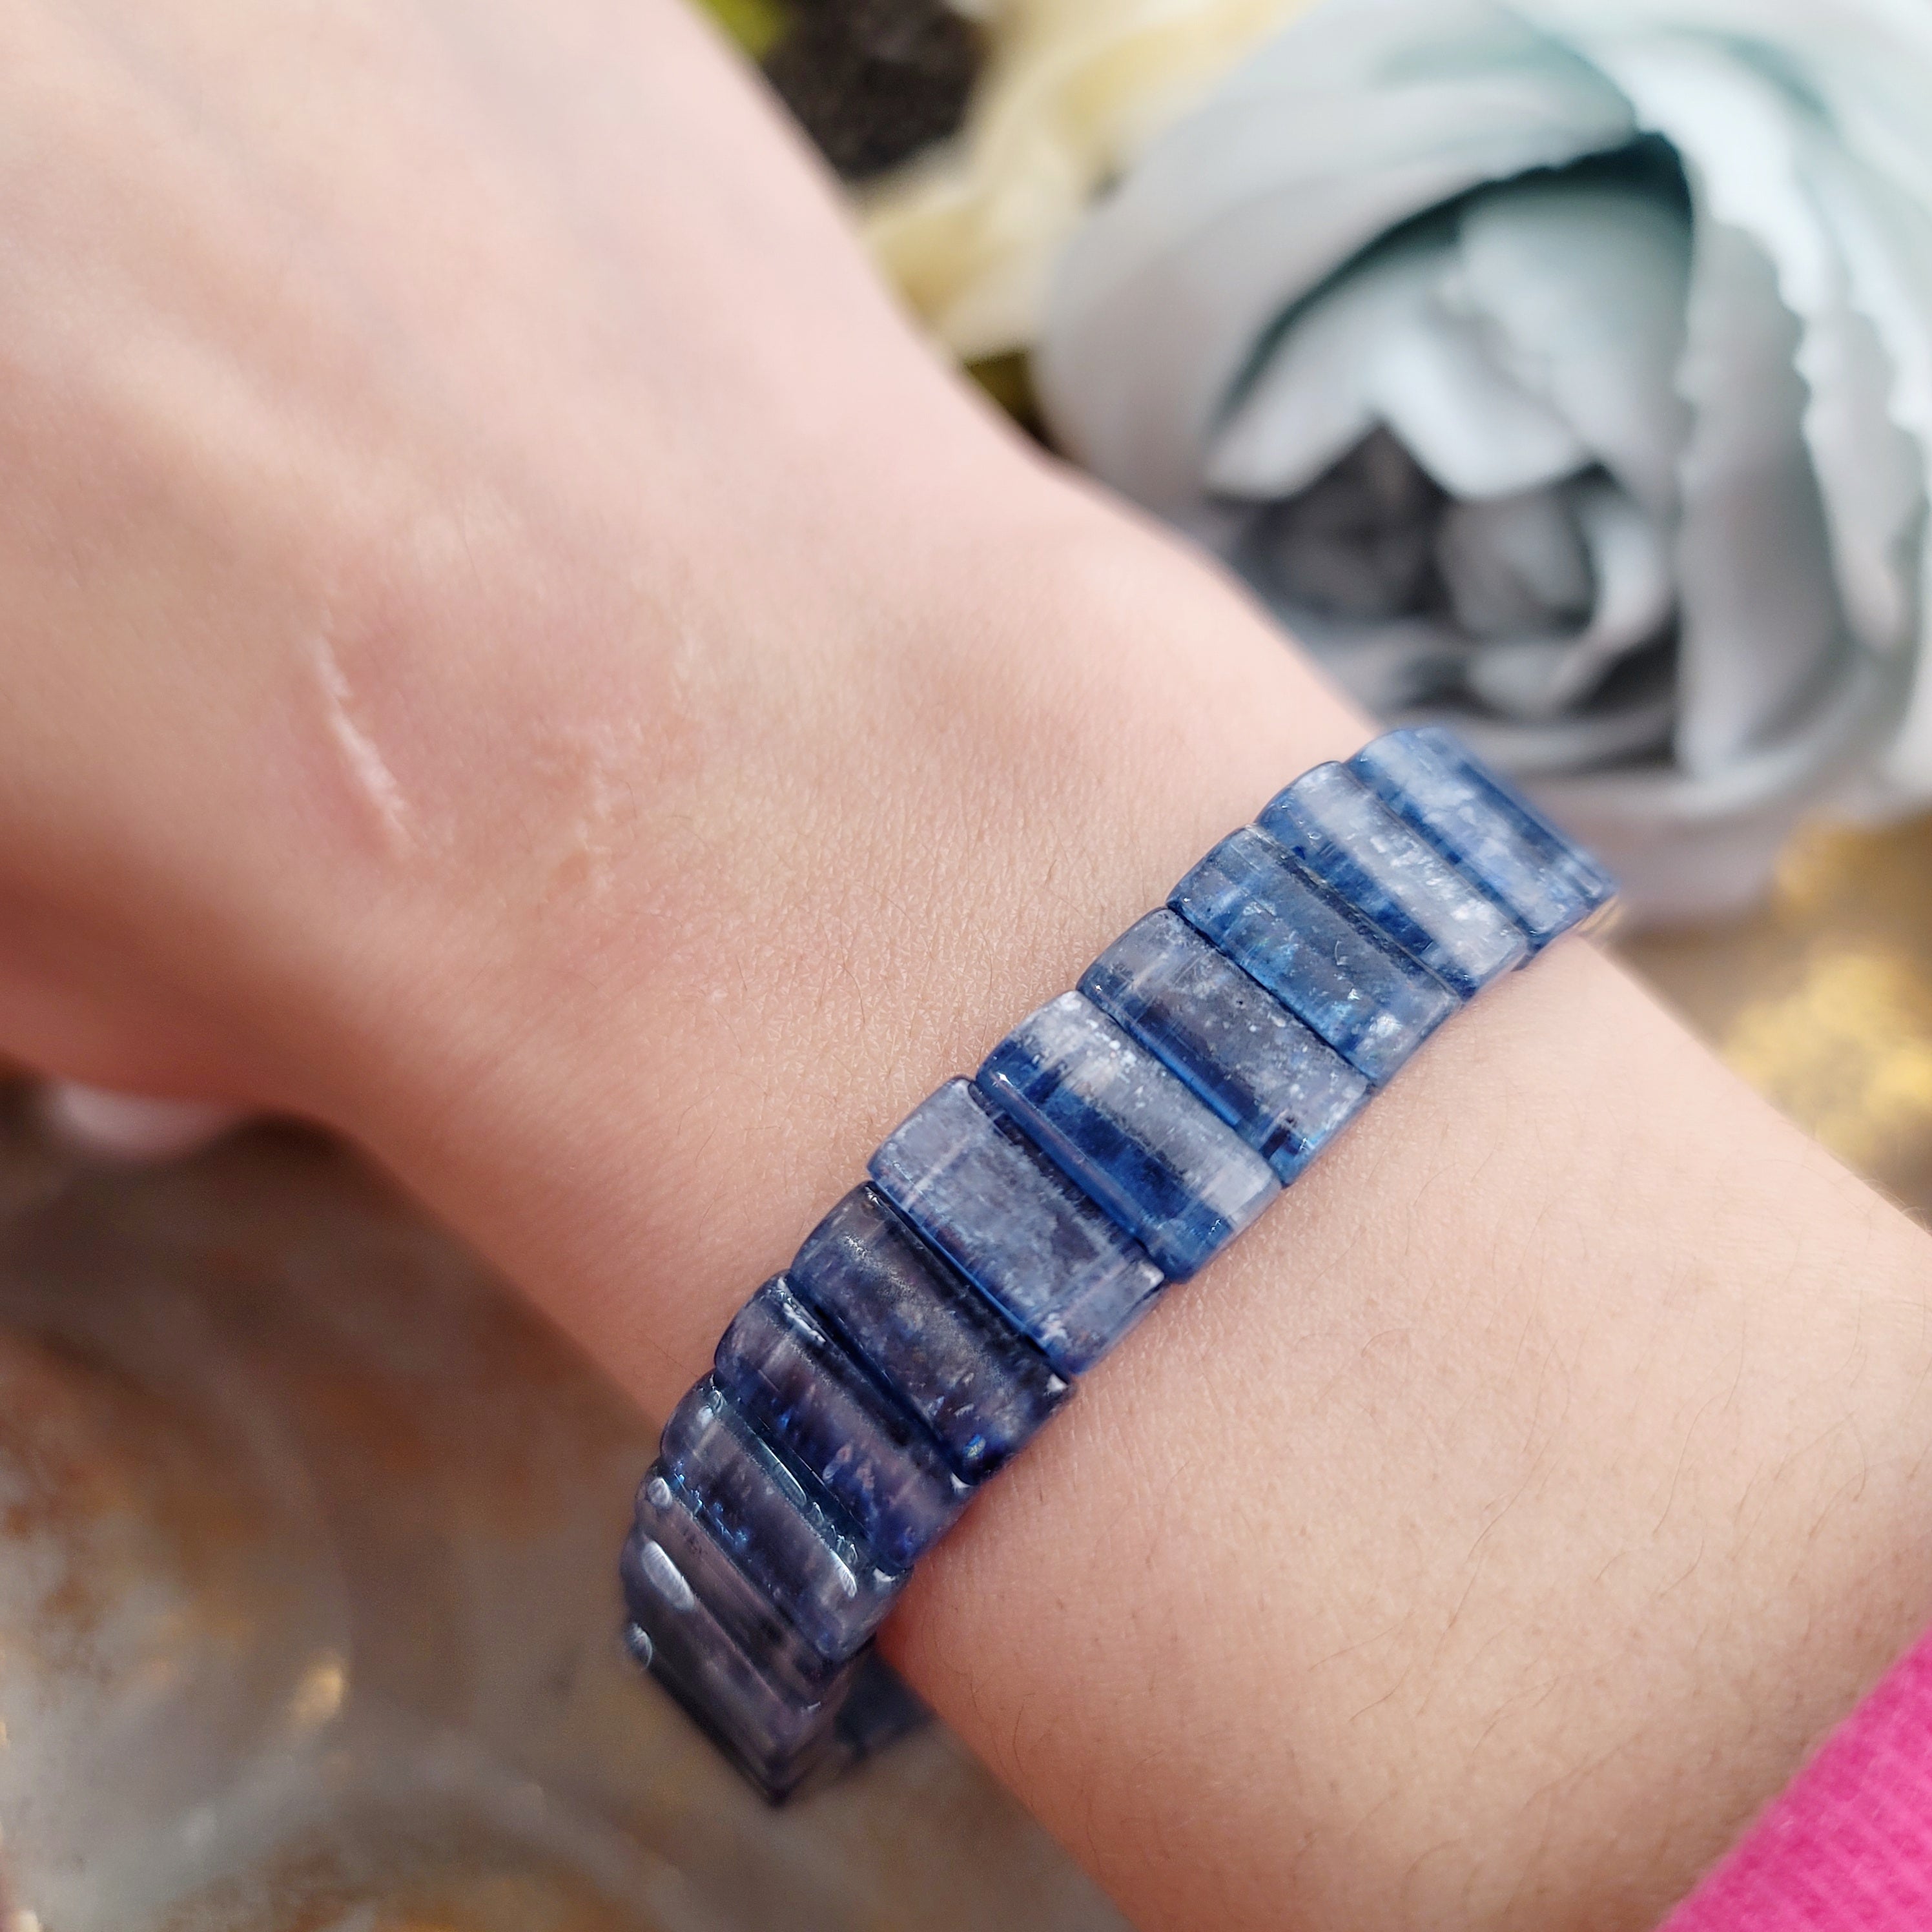 Kyanite Stretchy Bangle Bracelet for Purifying your Body's Energy Fields